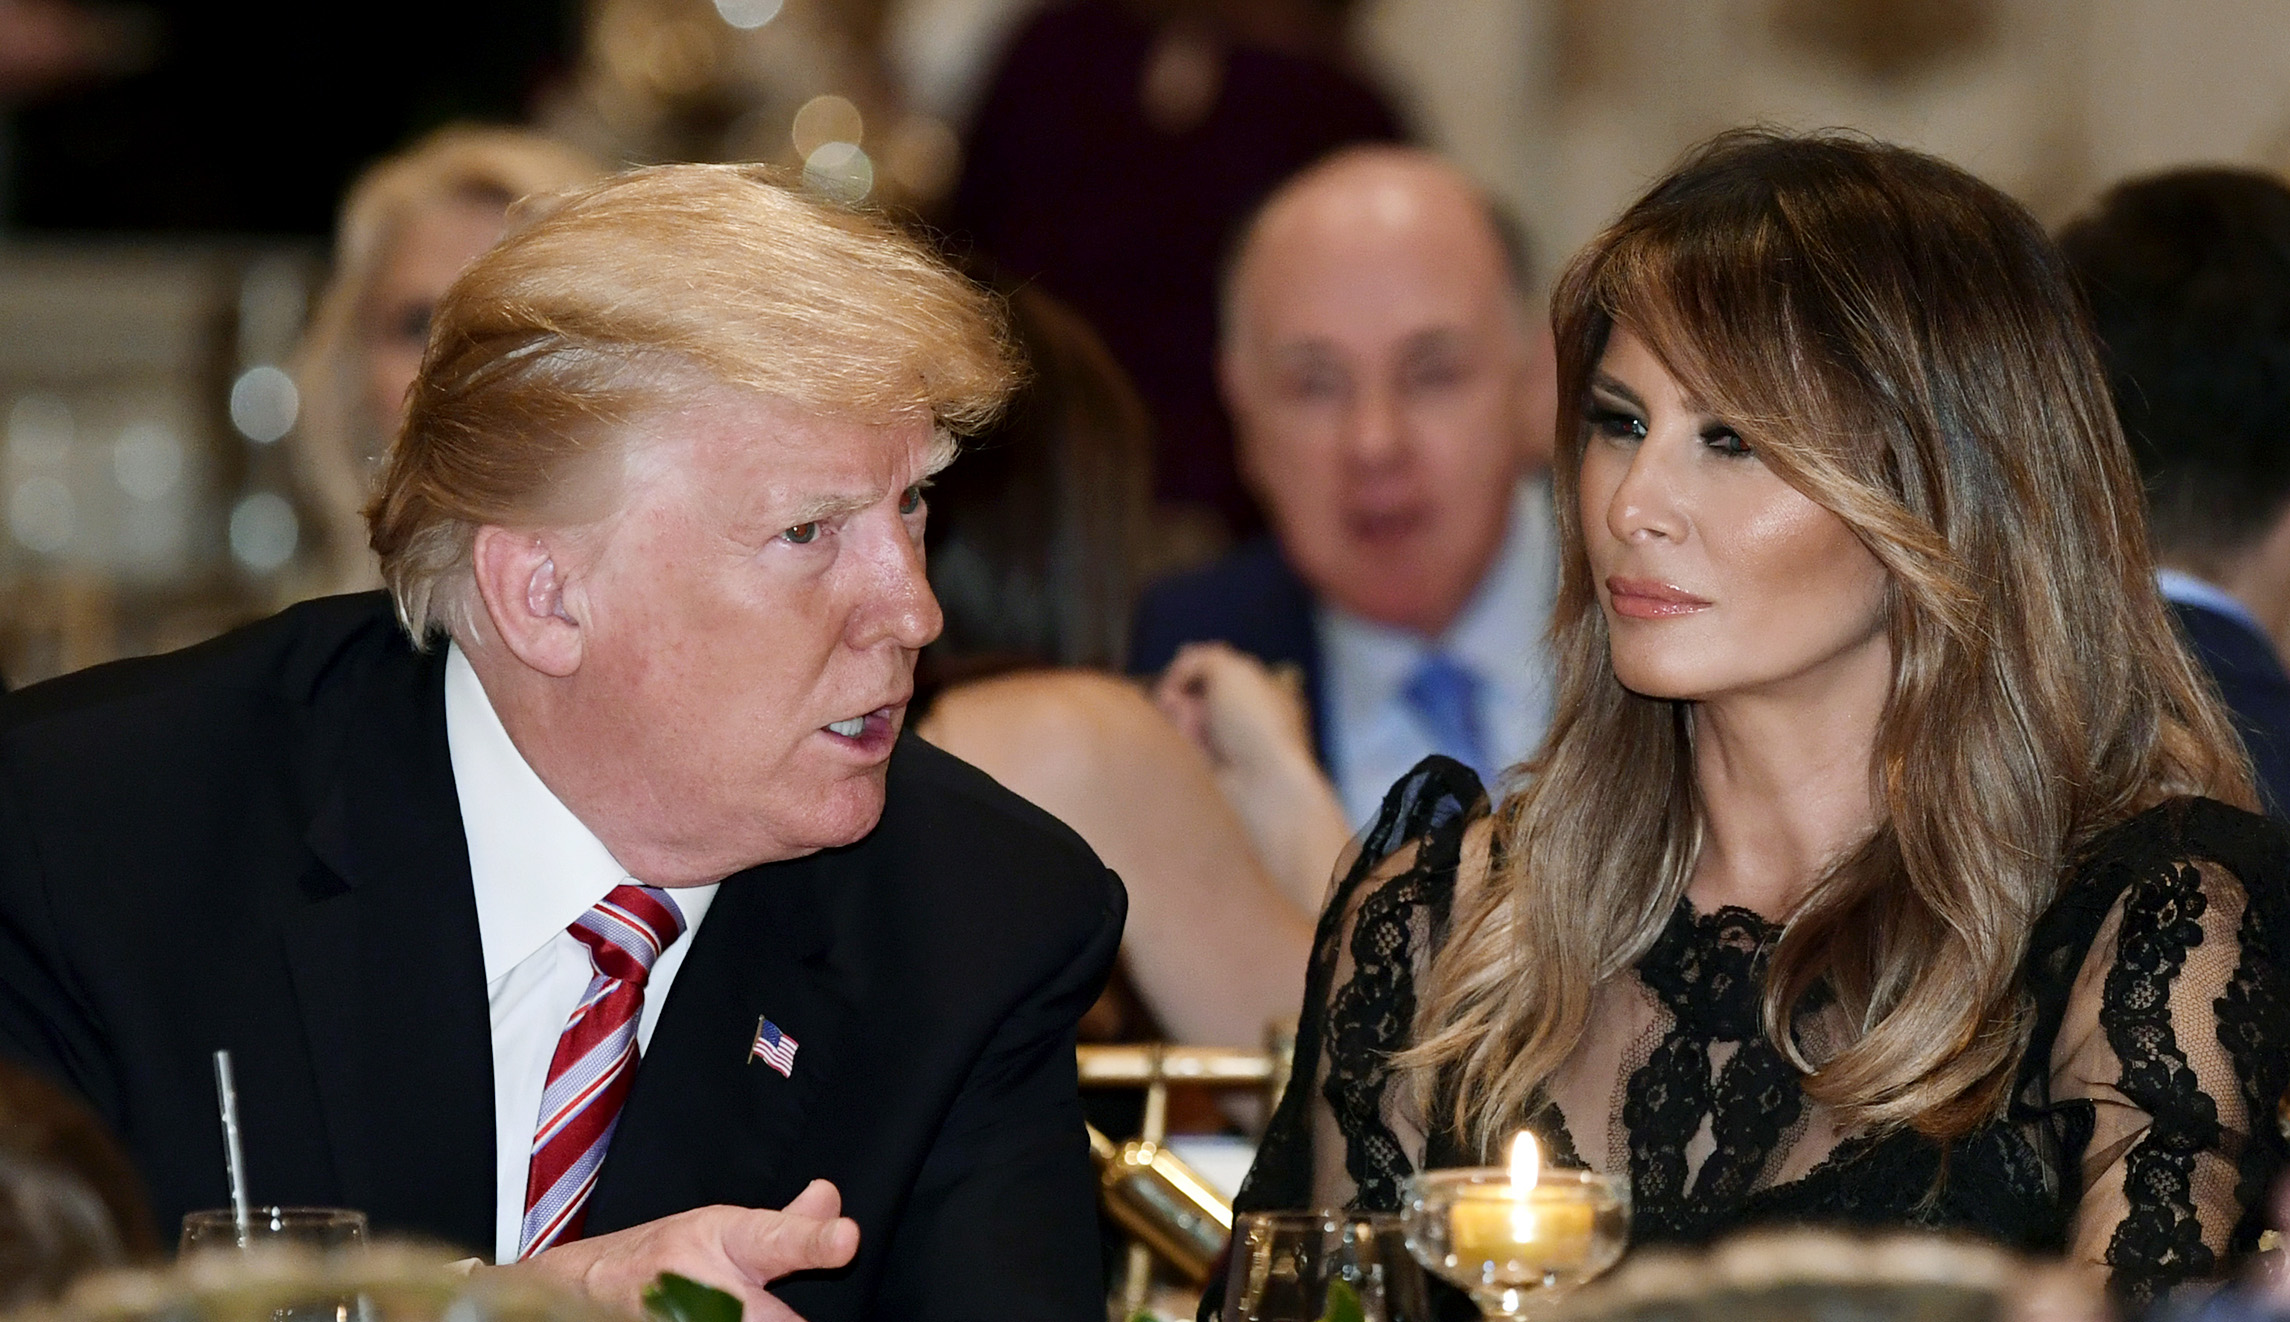 President Trump and first lady Melania Trump have a dinner at Mar-a-Lago in Florida.